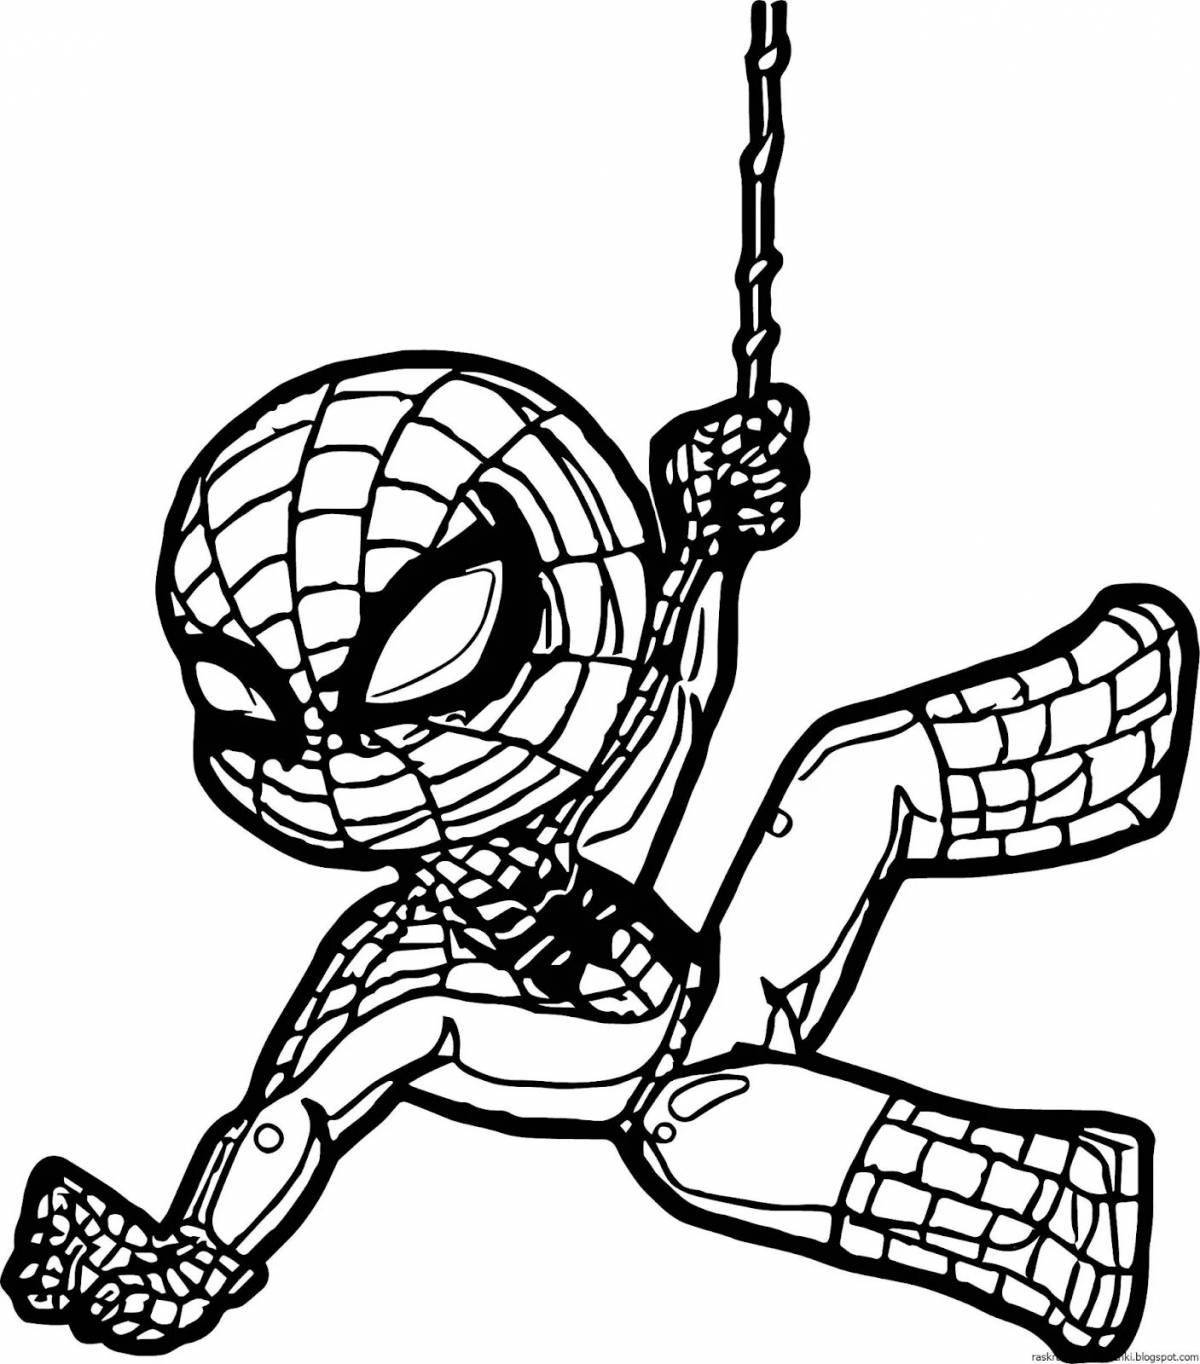 Spiderman fun coloring book for 5 year olds